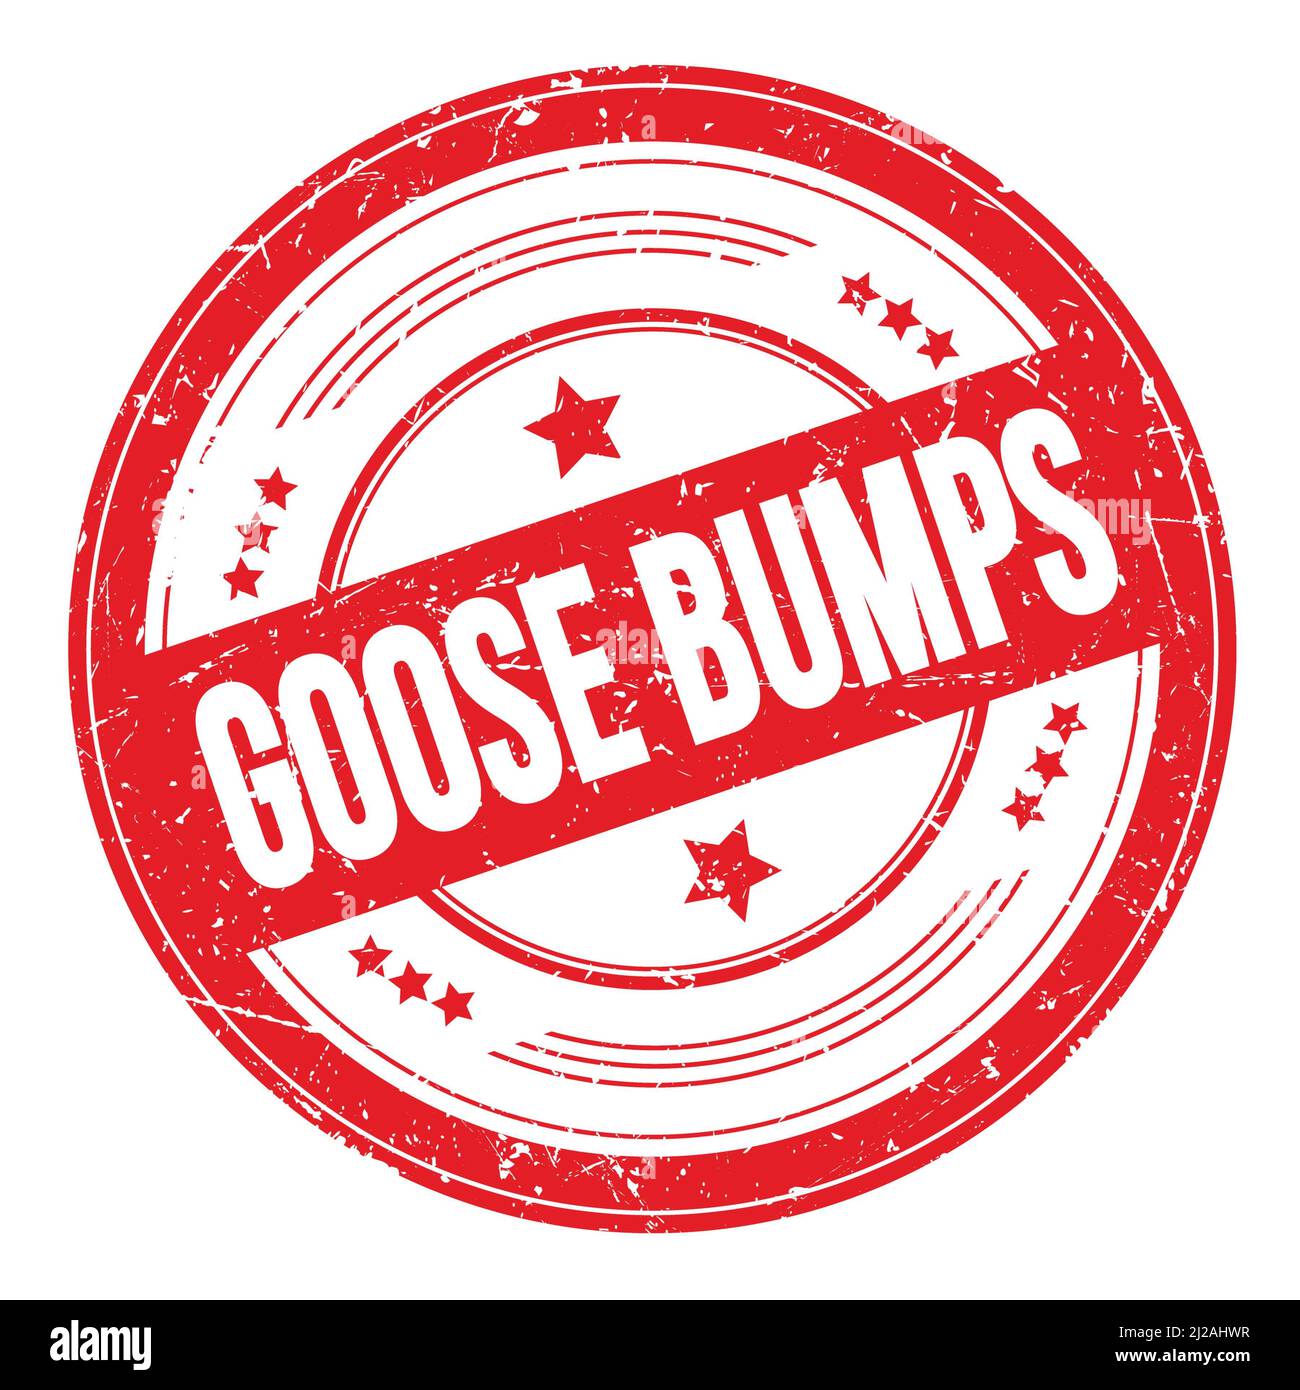 GOOSE BUMPS text on red round grungy texture stamp. Stock Photo